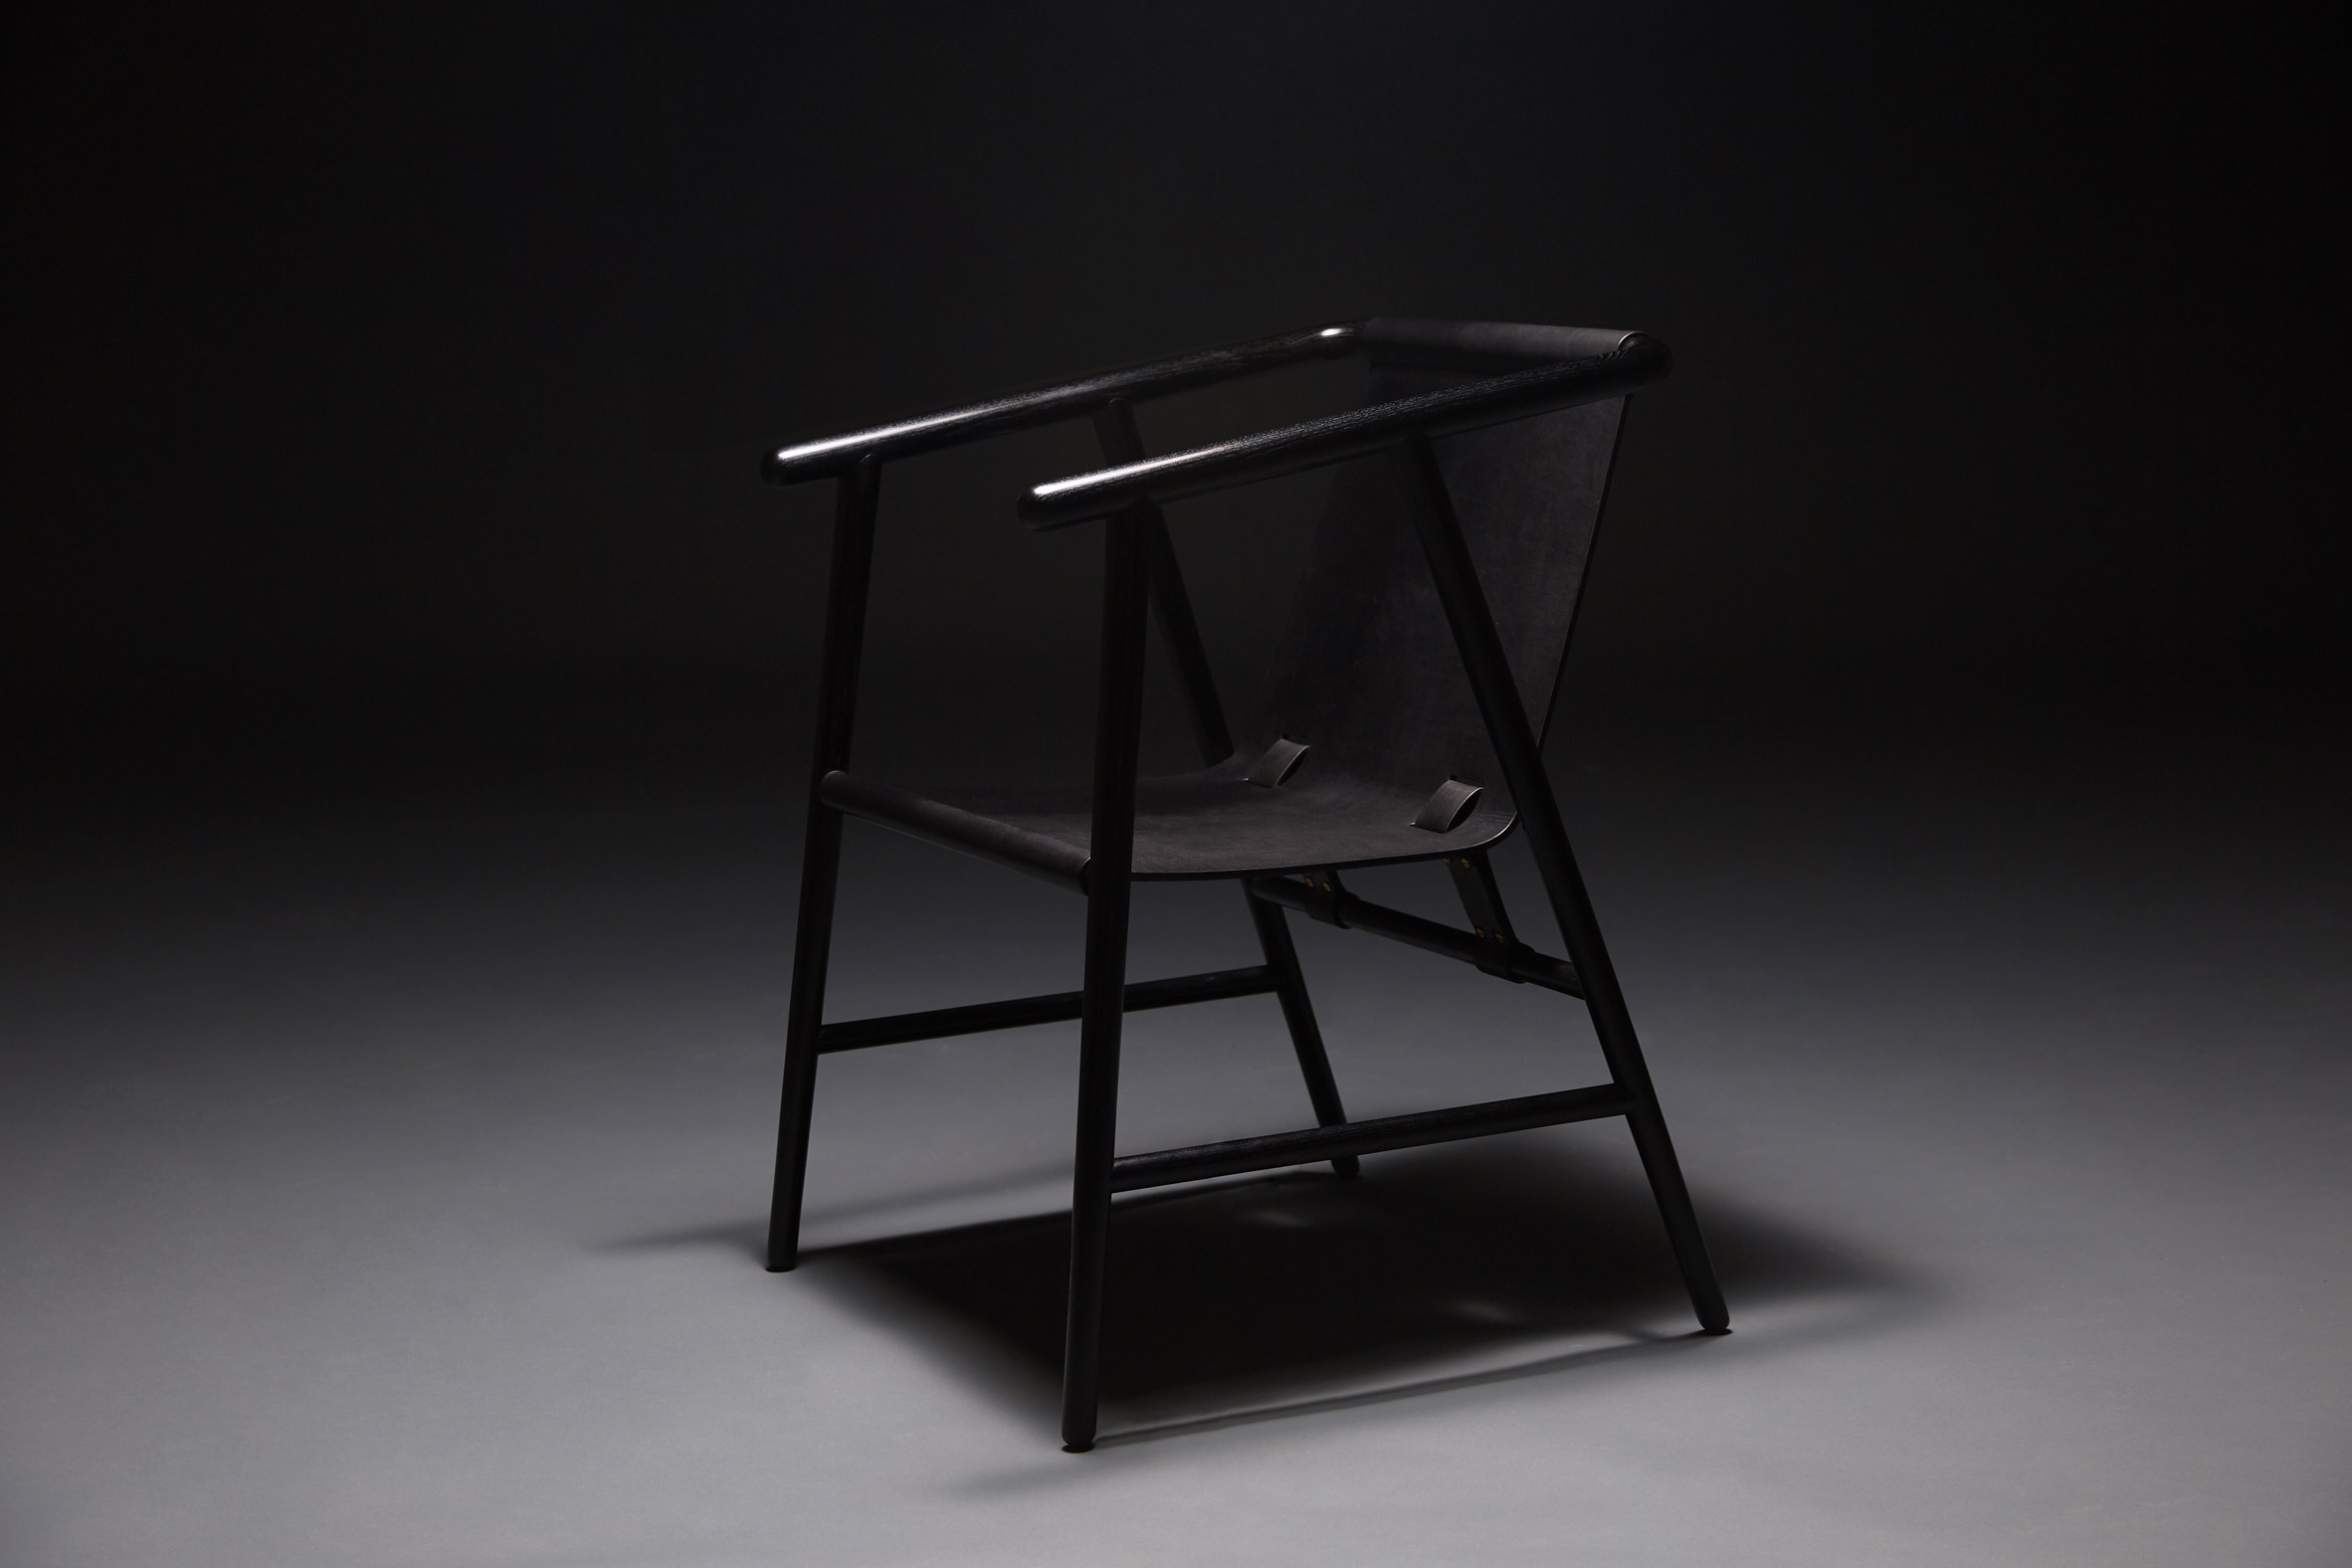 Black Dream is a series of "furniture with soul" by Sheng Yin and Kai Yi